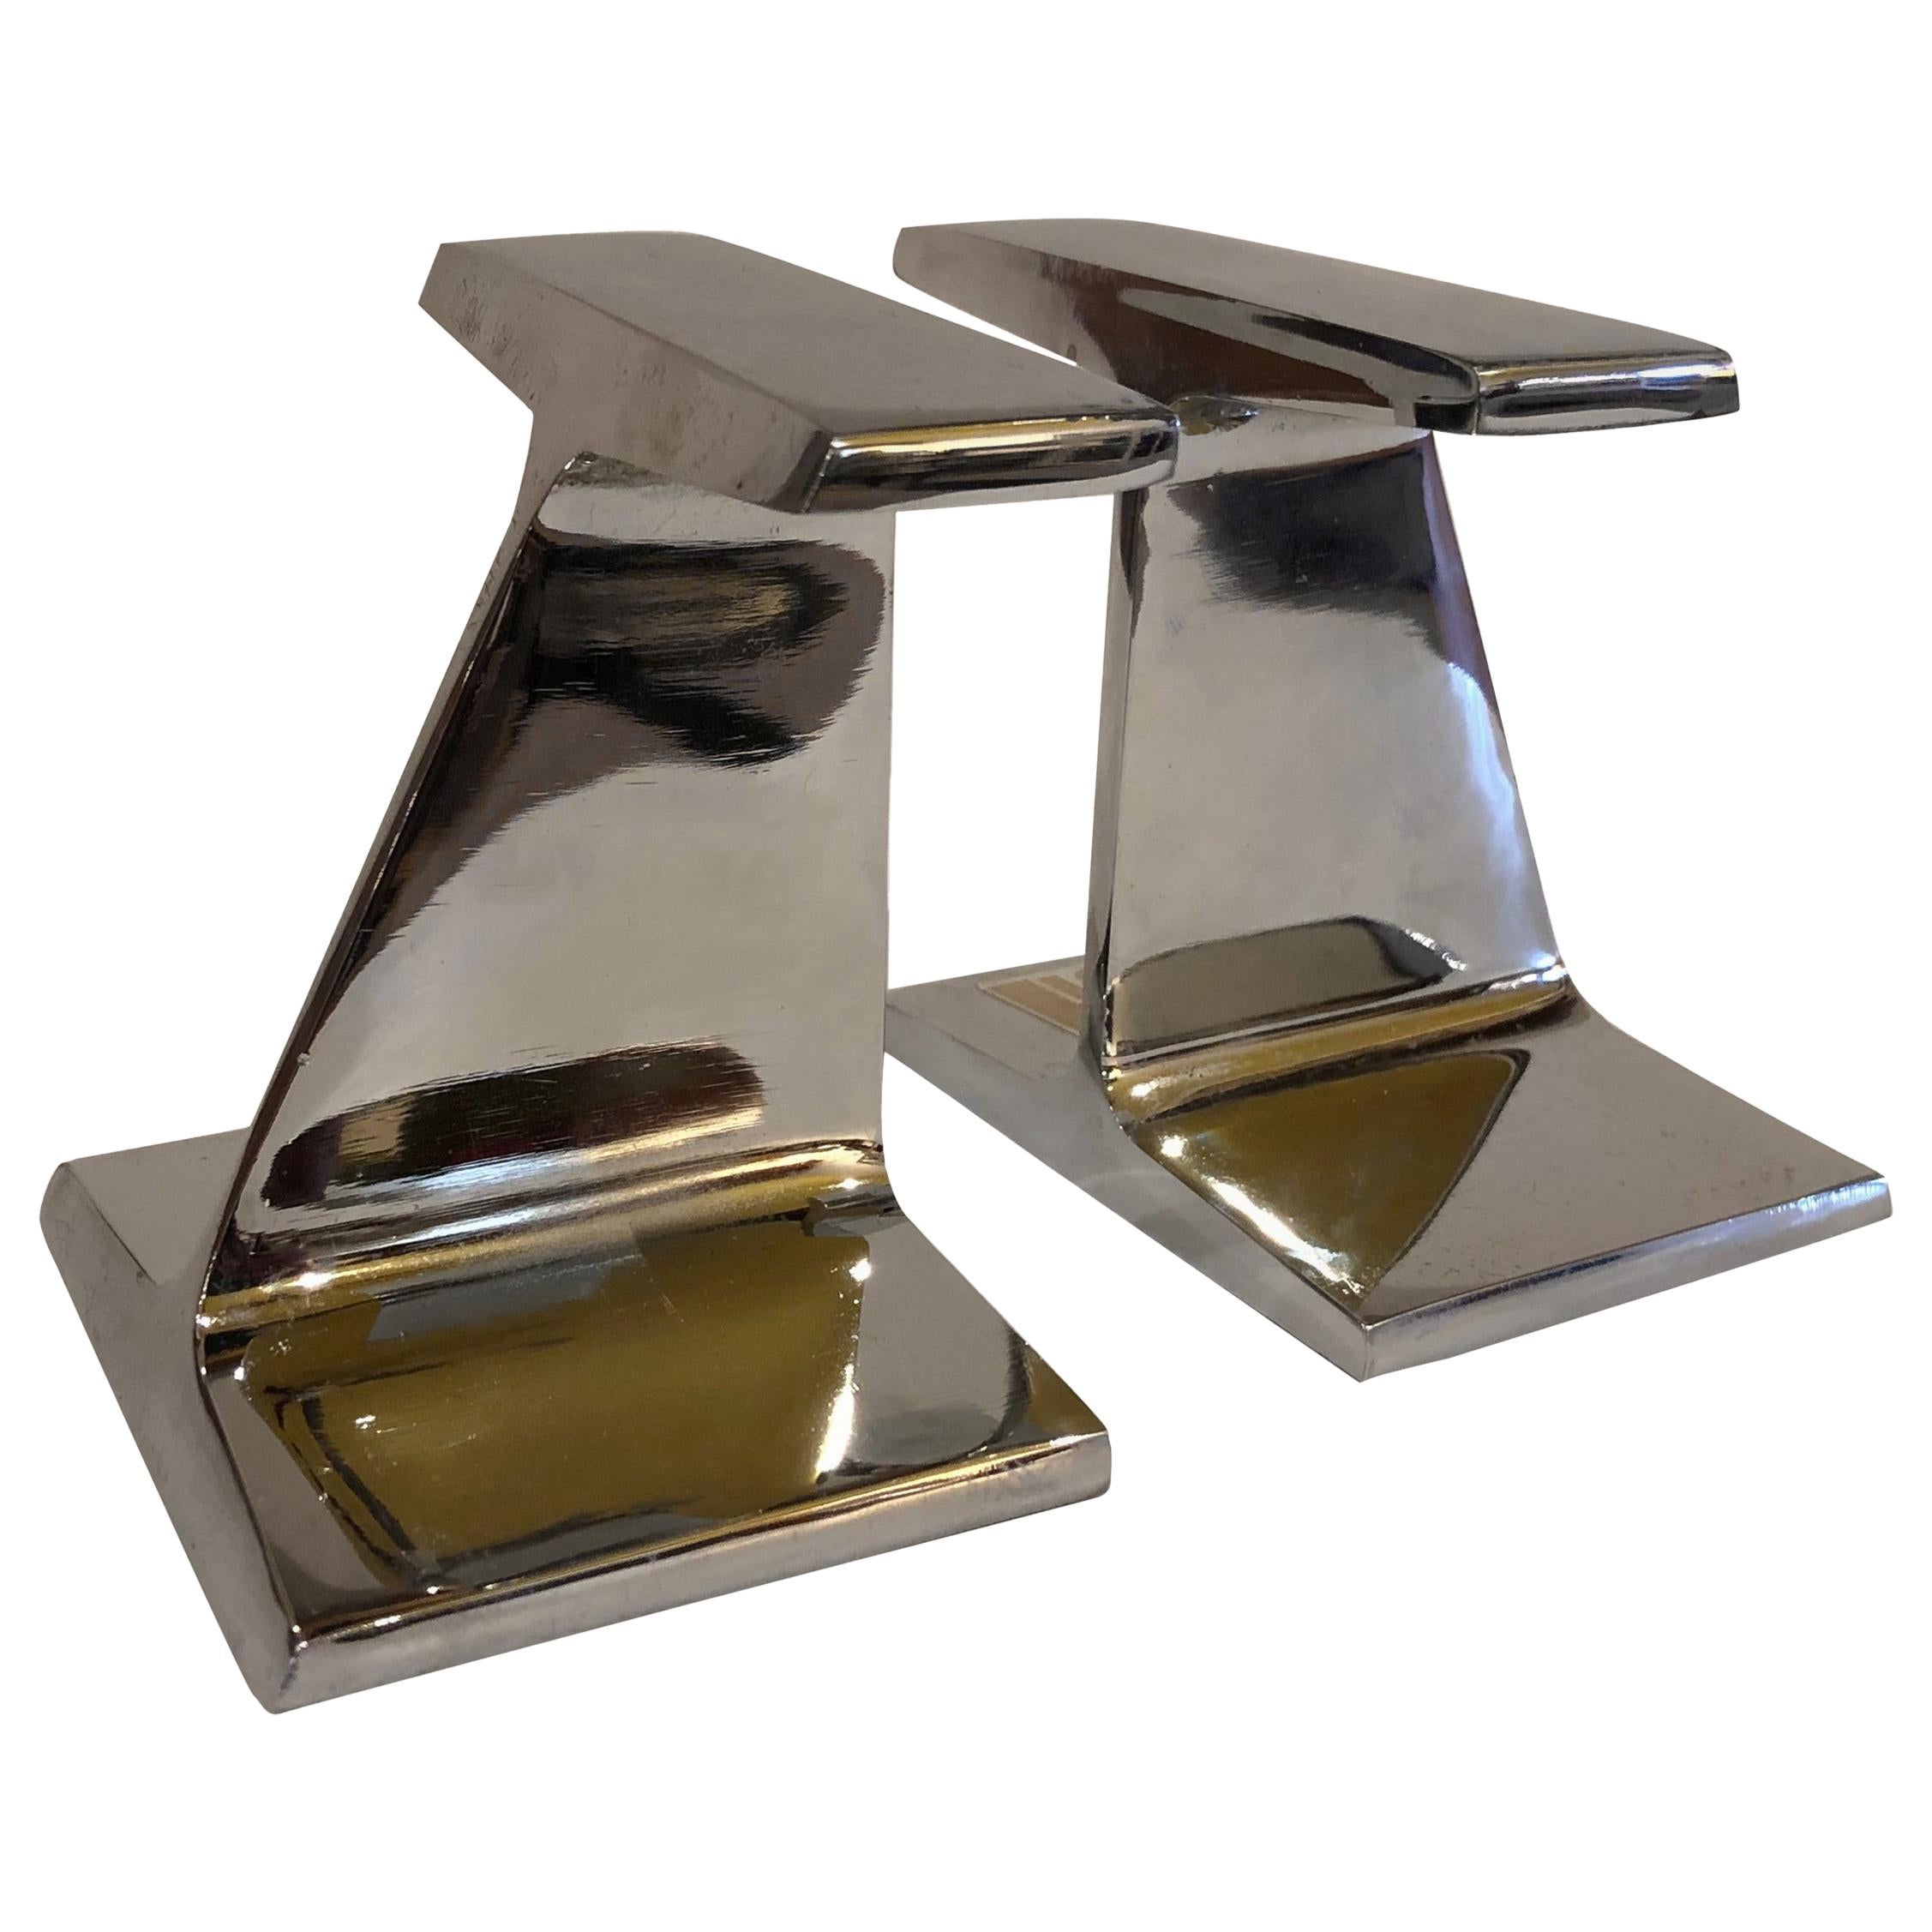 Pair of Modernist Chromed Steel I-Beam Bookends by Bill Curry for Design Line